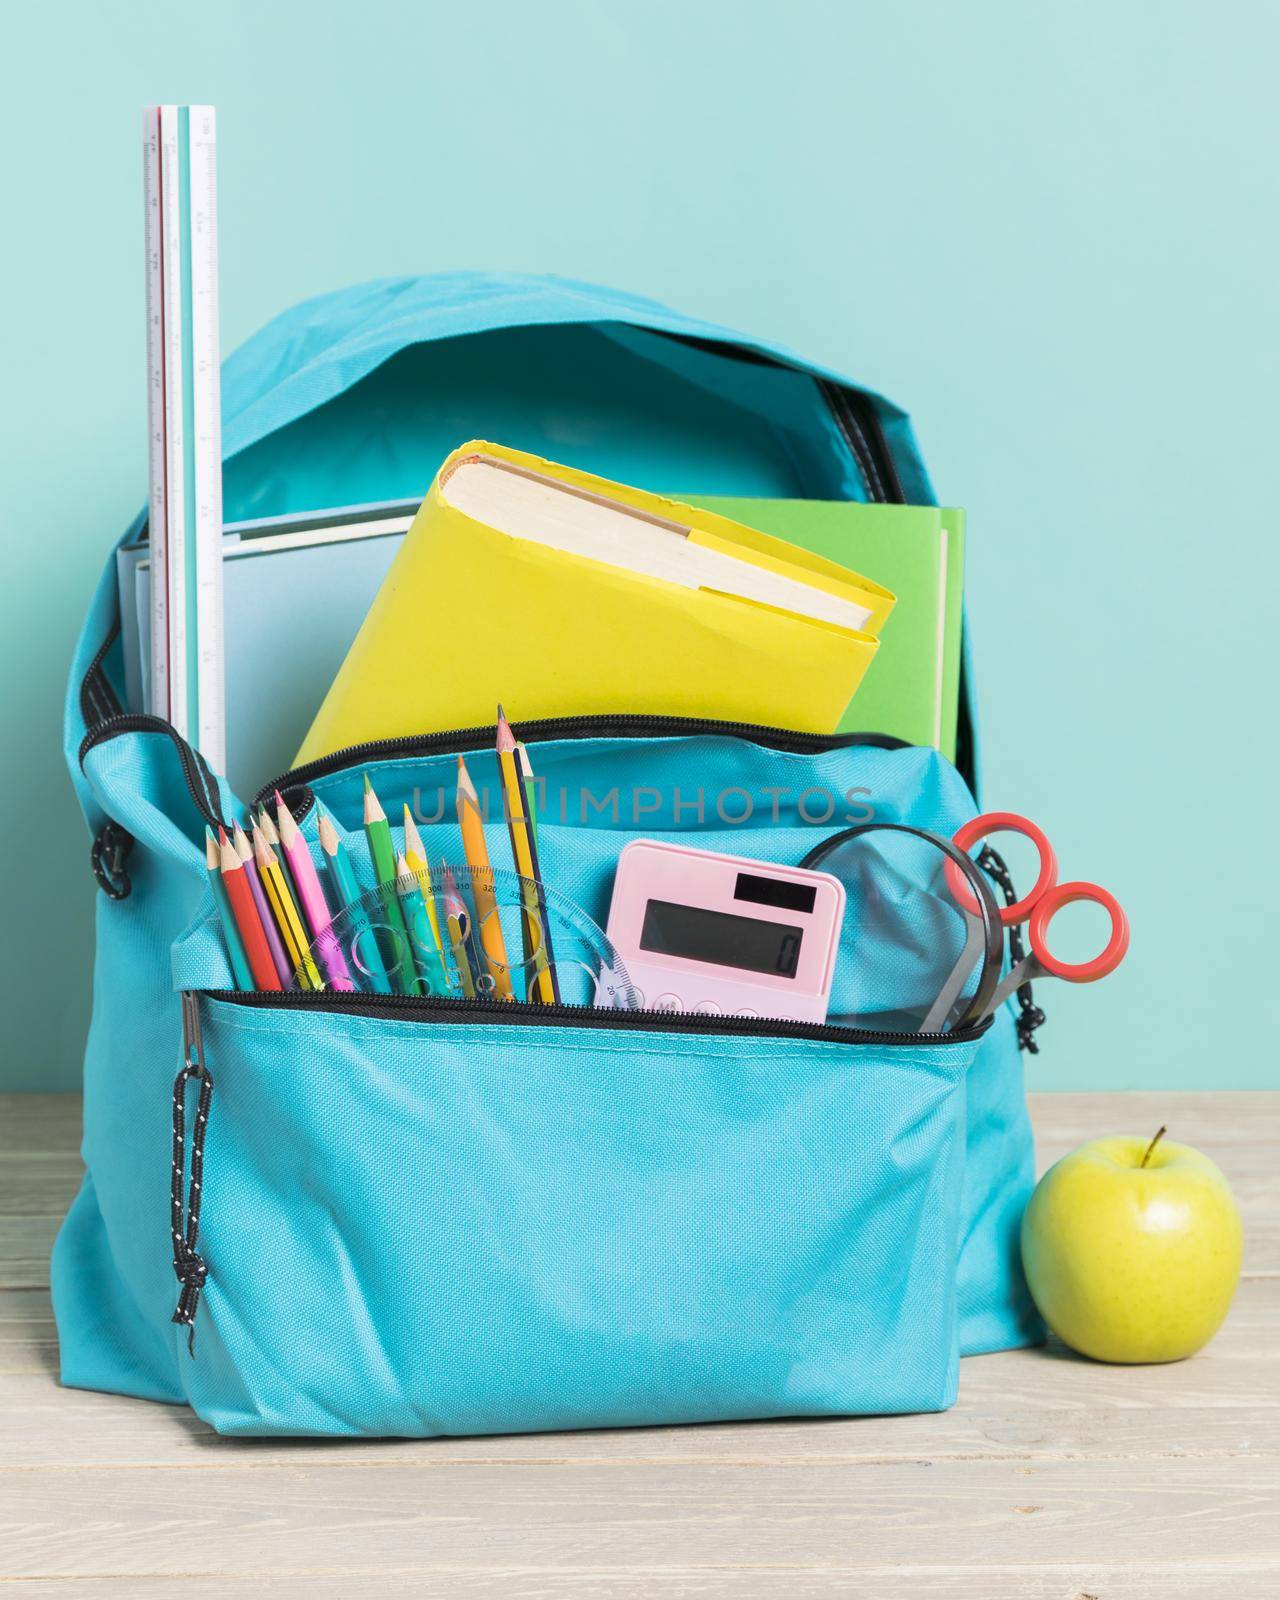 blue school bag with essential supplies by Zahard